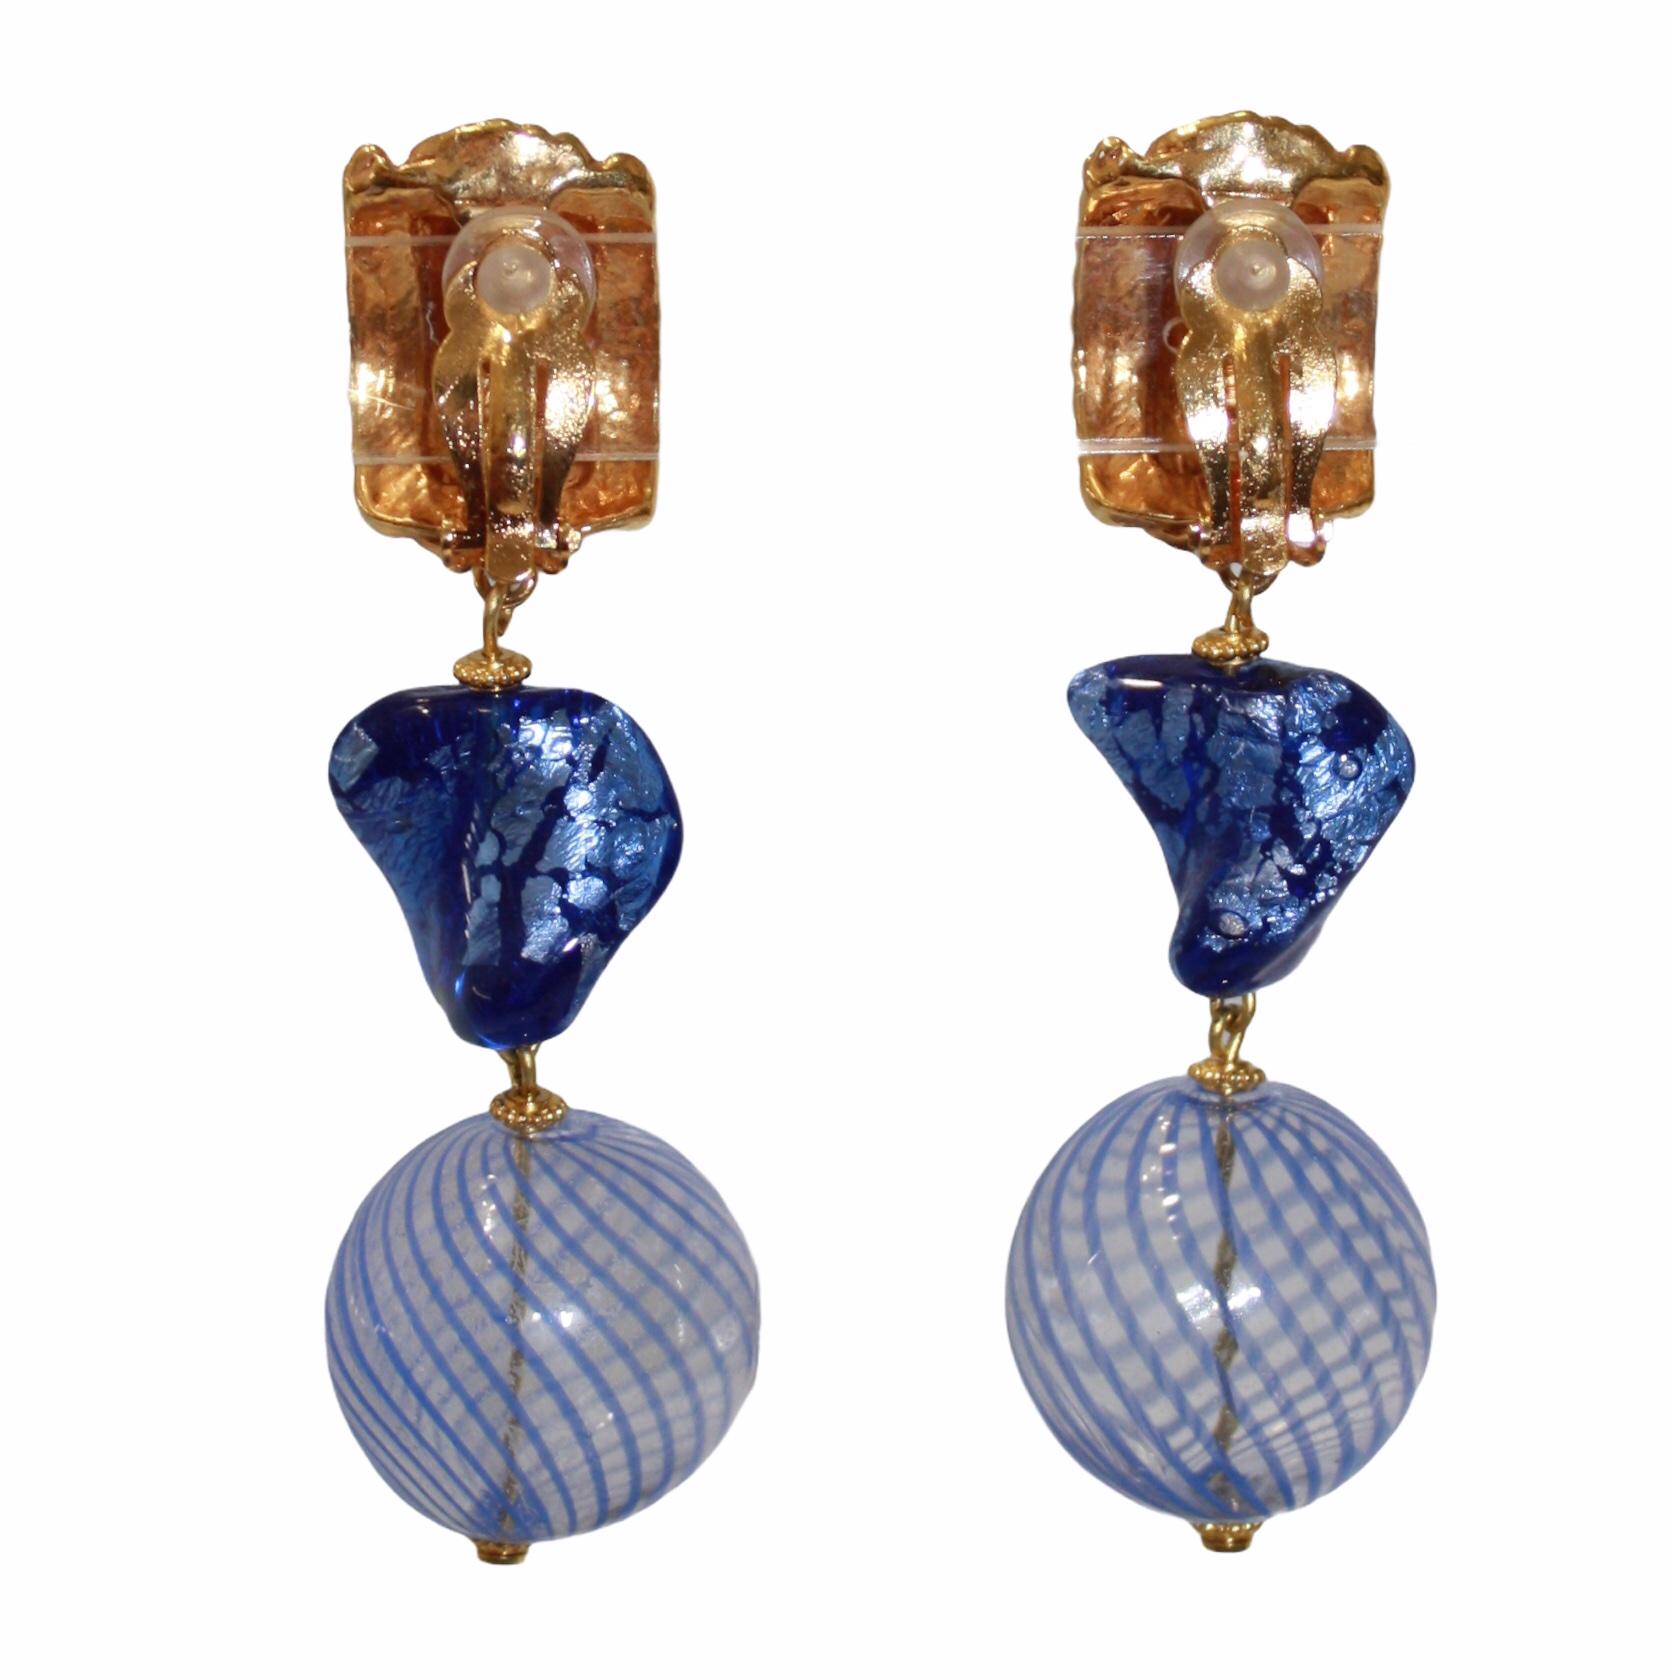 Circa 1990s beautiful and rare drops earrings featuring Murano glass work in majorelle blue, 24-carat dipped brass. Clip earrings with YSL signature in the back.